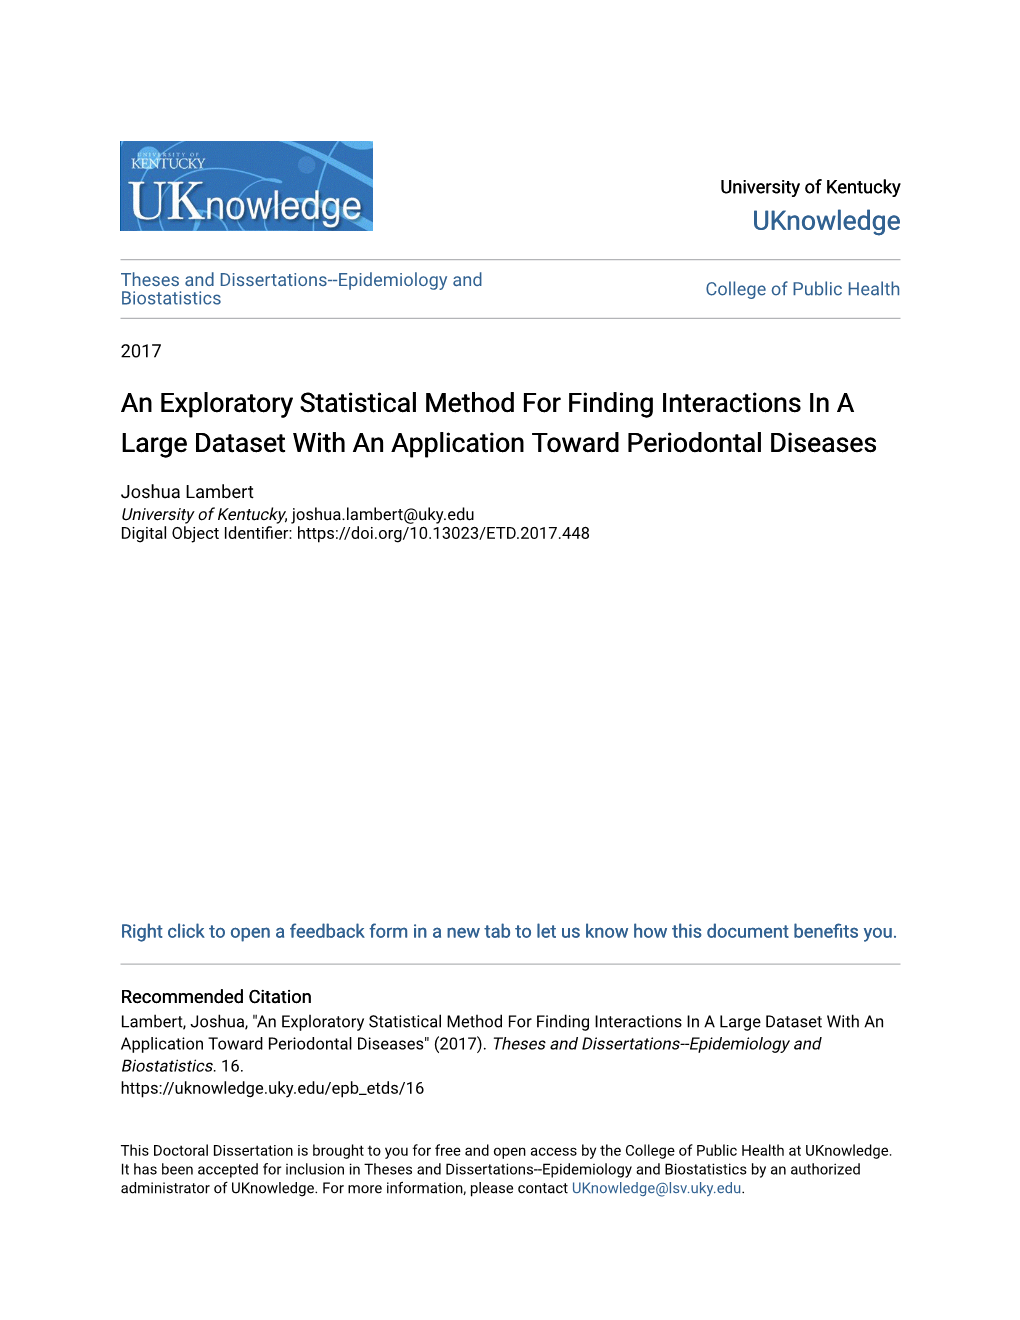 An Exploratory Statistical Method for Finding Interactions in a Large Dataset with an Application Toward Periodontal Diseases